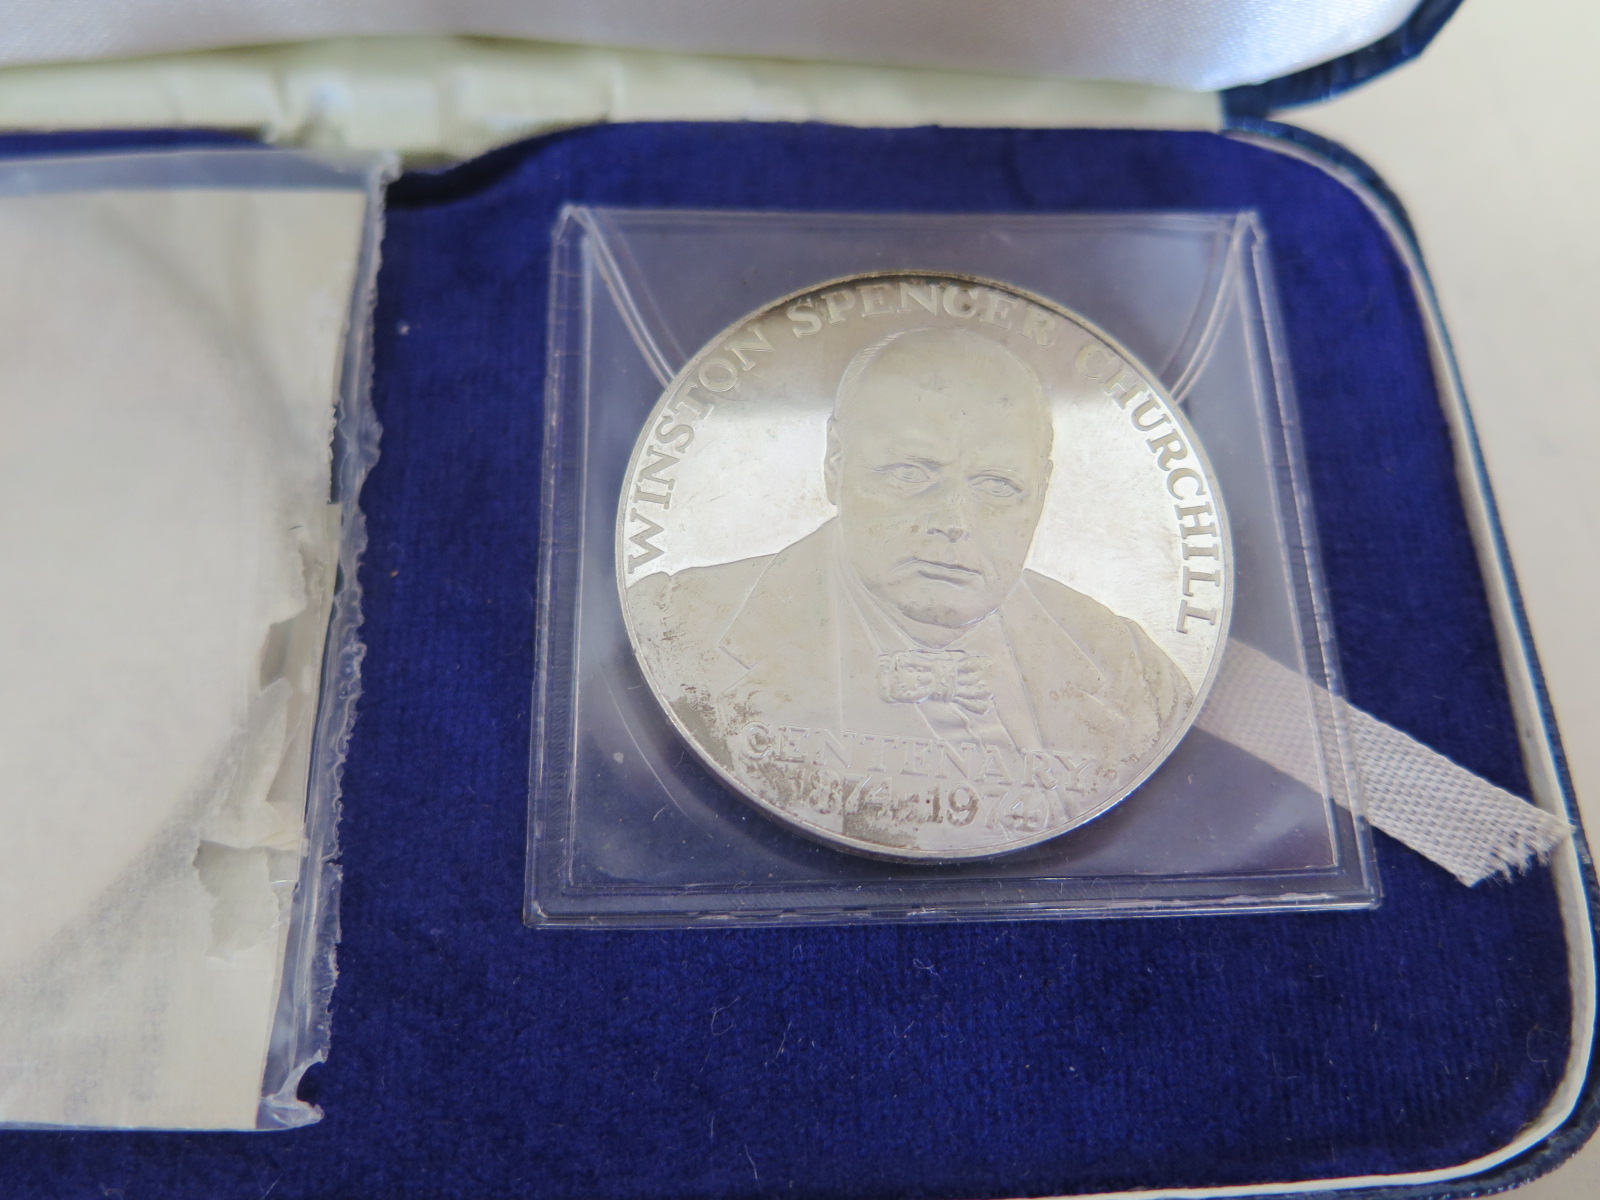 A boxed set of silver proof sterling Winston Churchill, coins, approx 3.5 troy oz, one still - Image 2 of 2